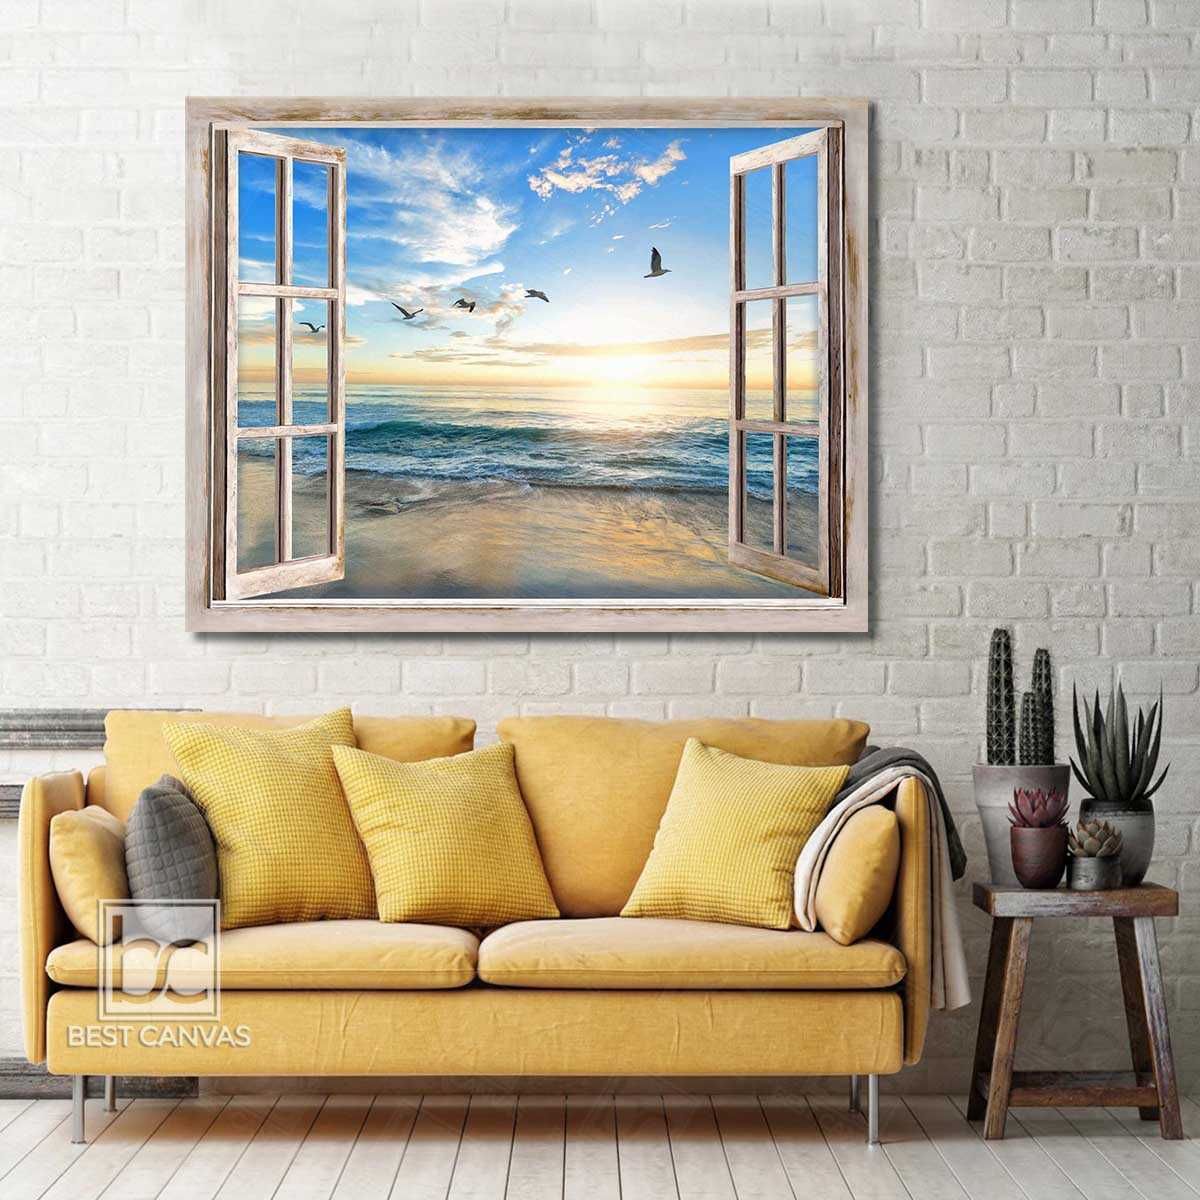 Top 03 Gorgeous Sunrise Beach Canvas Wall Art Beach View Through White  Window Large Sizes Wrapped Or Framed Canvas Best Canvas Wall Art – Best Canvas  Wall Art Throughout Most Recent Sunrise Wall Art (View 11 of 20)